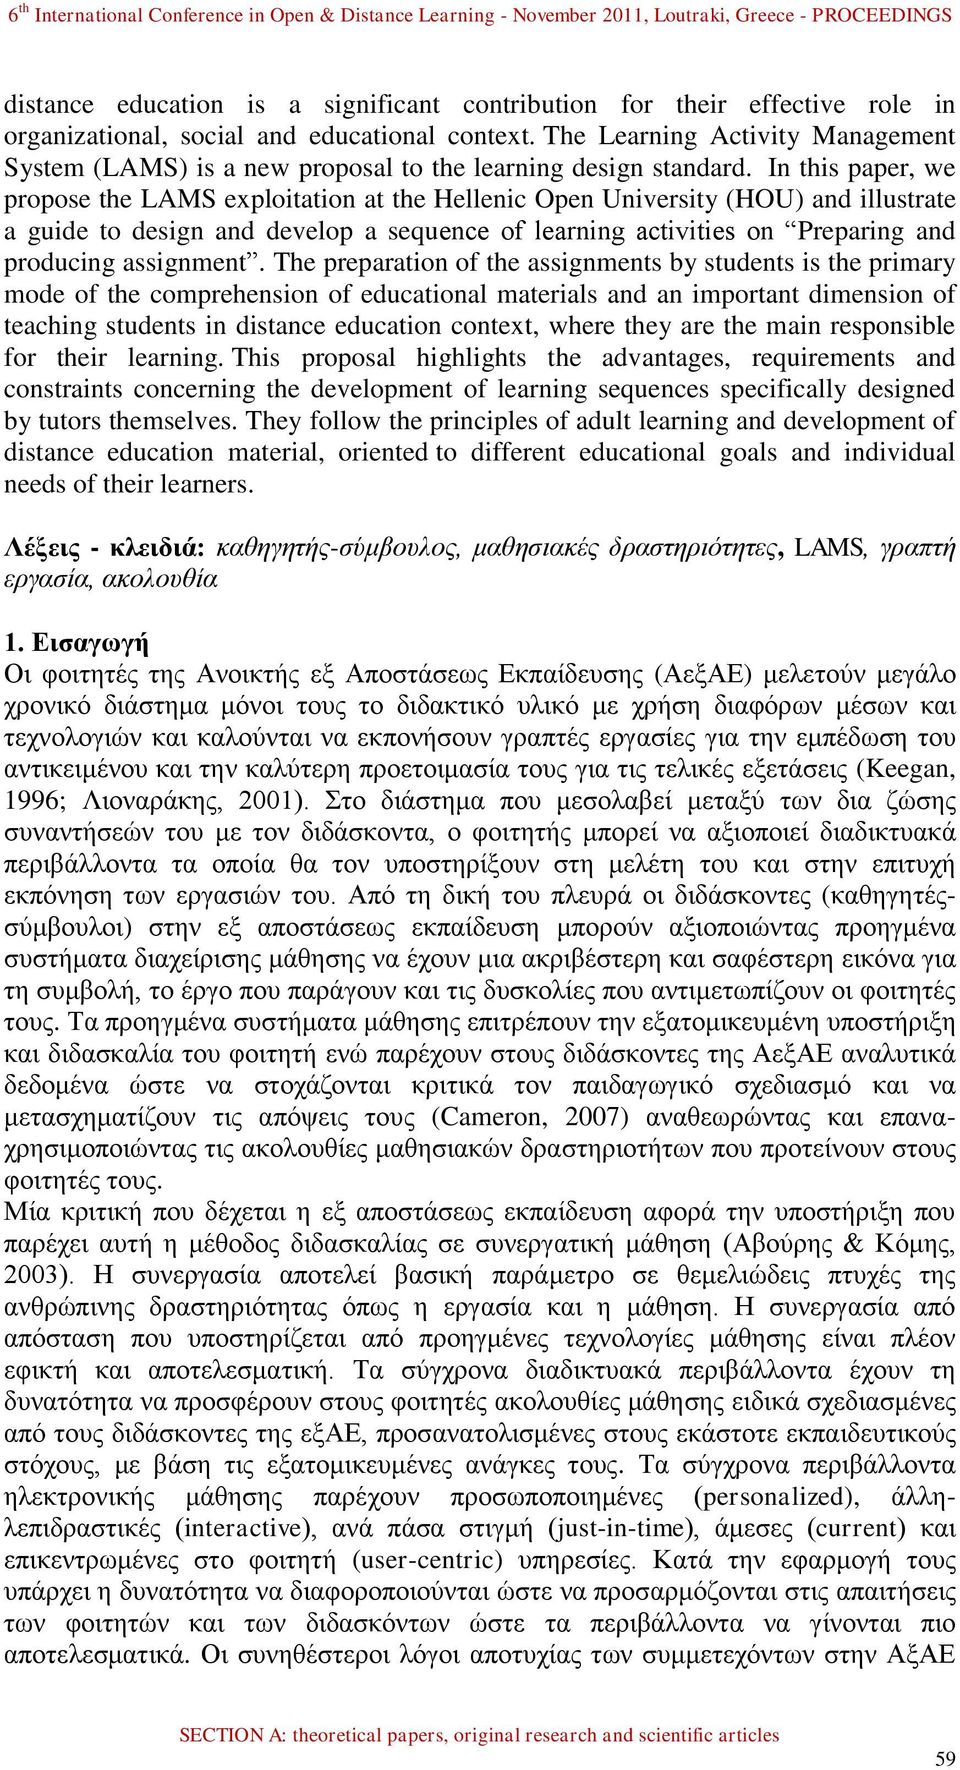 In this paper, we propose the LAMS exploitation at the Hellenic Open University (HOU) and illustrate a guide to design and develop a sequence of learning activities on Preparing and producing